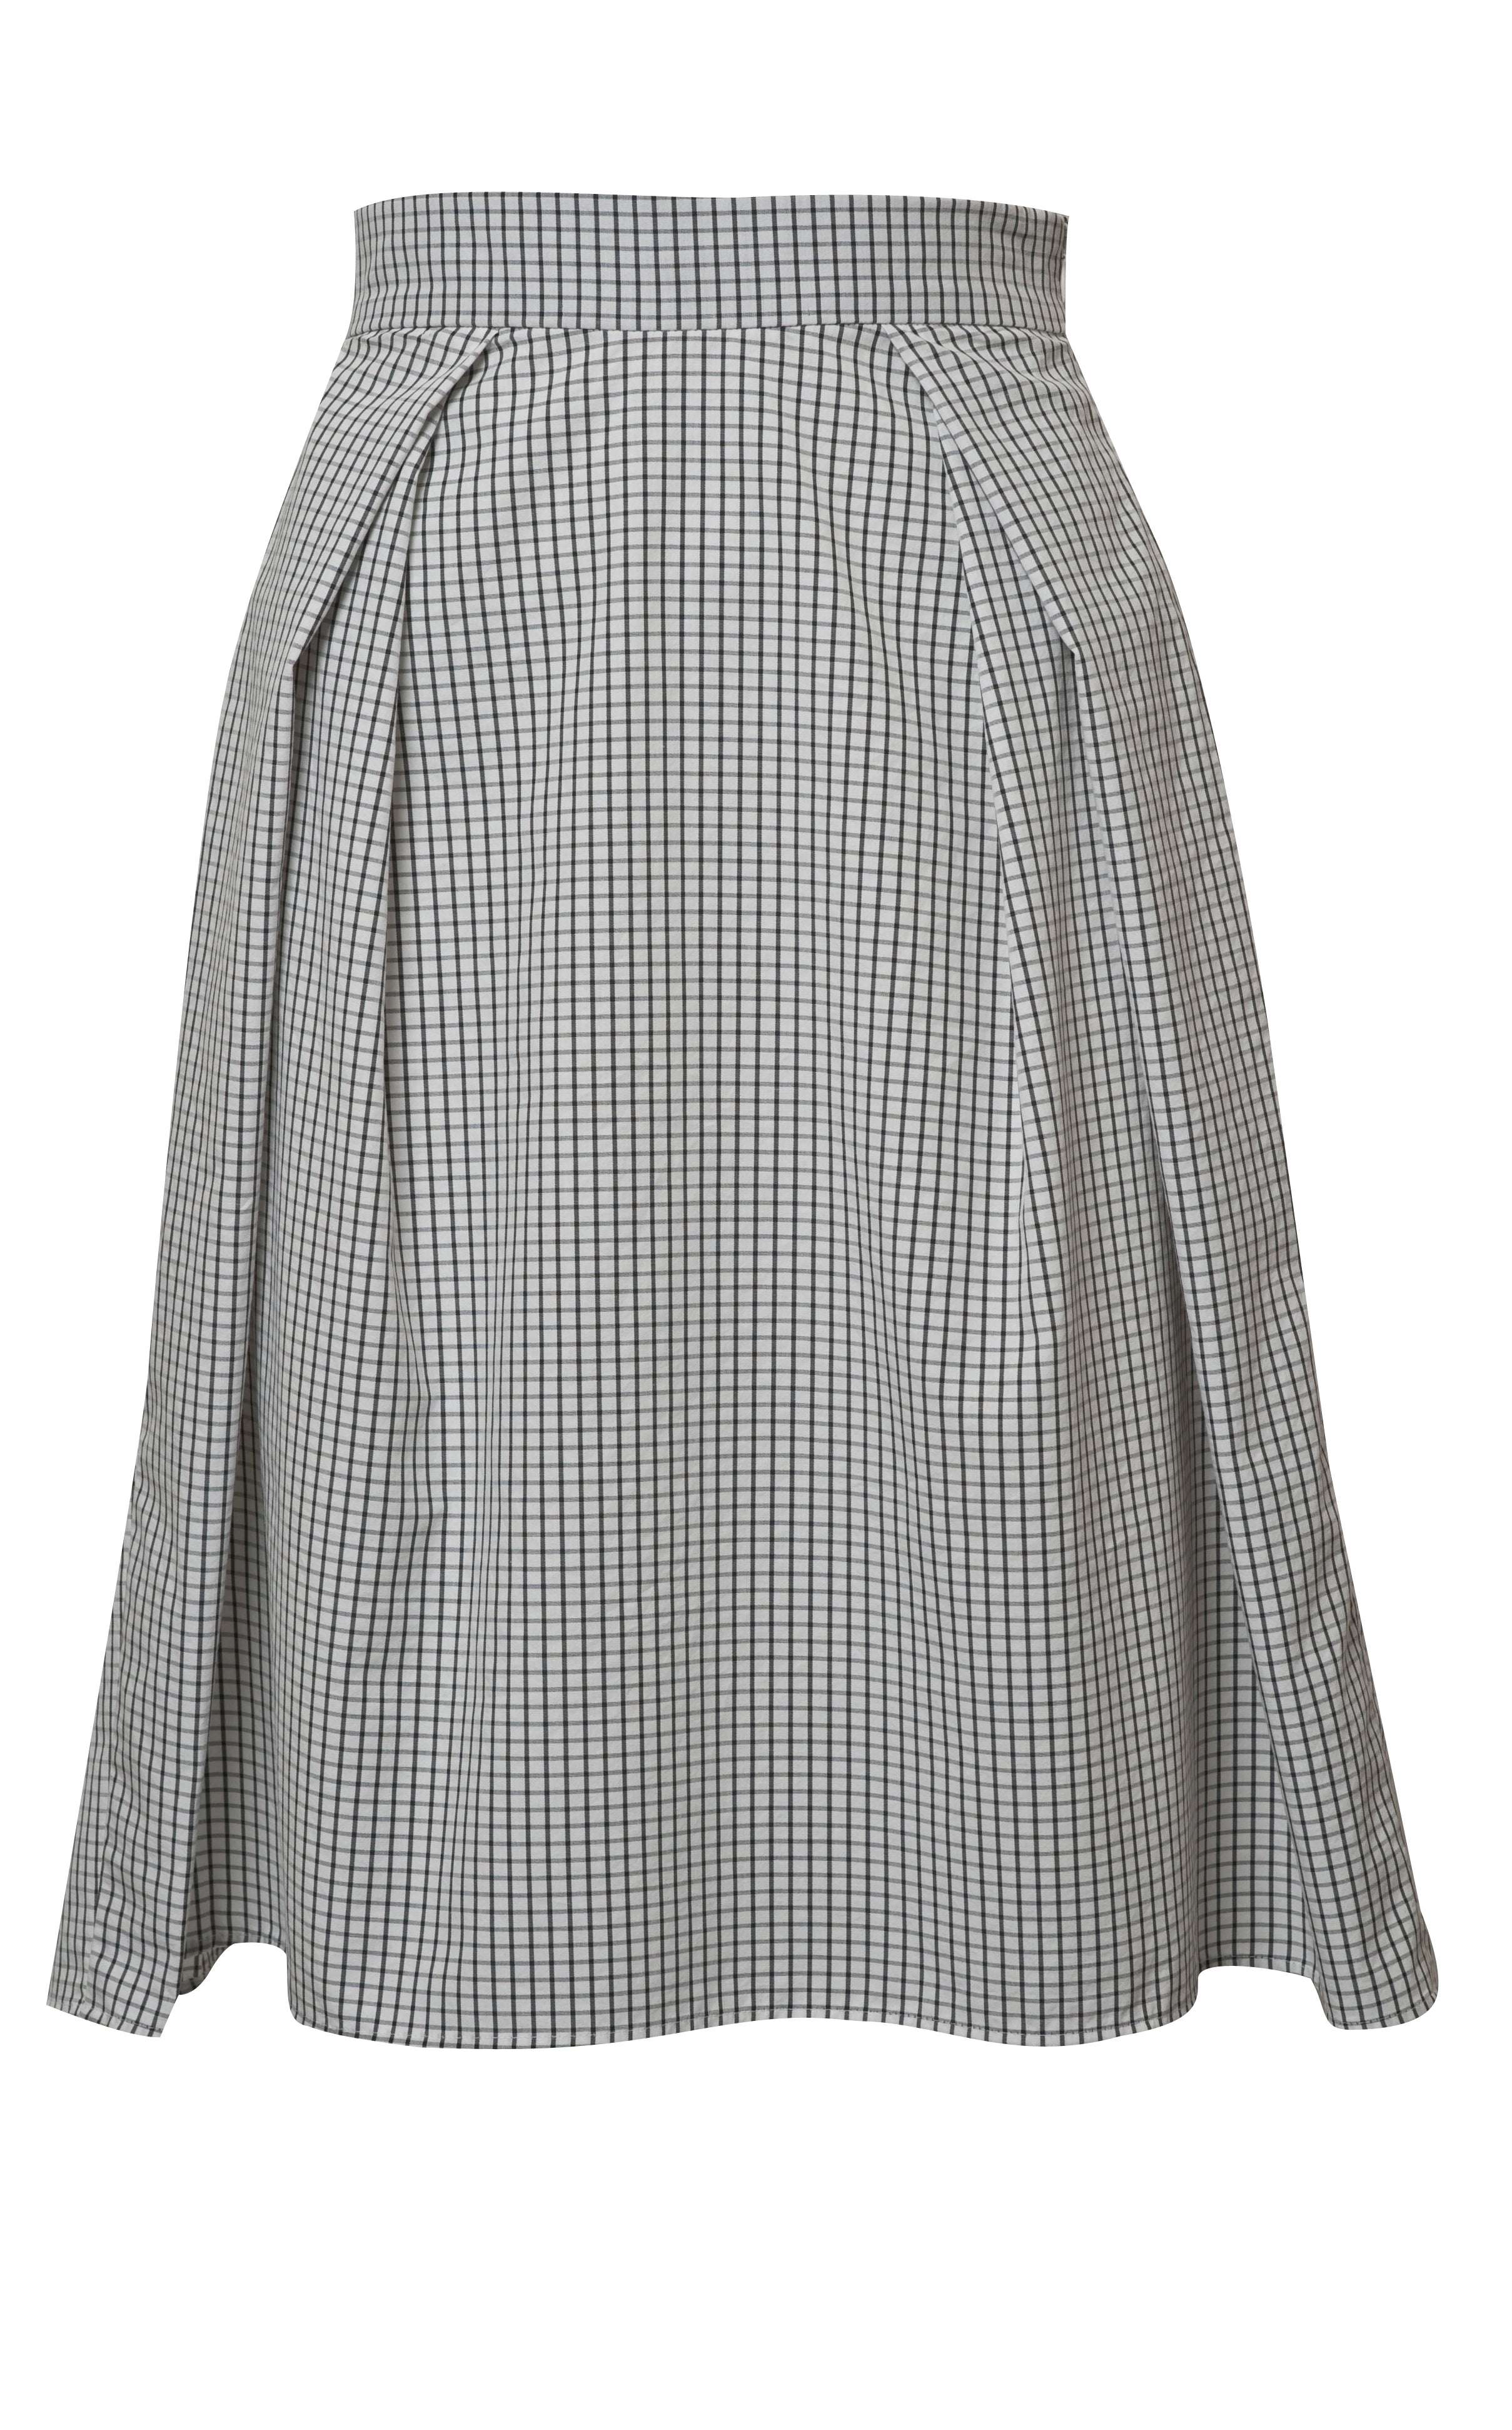 TWO FOLD DOUBLE PLEAT SKIRT